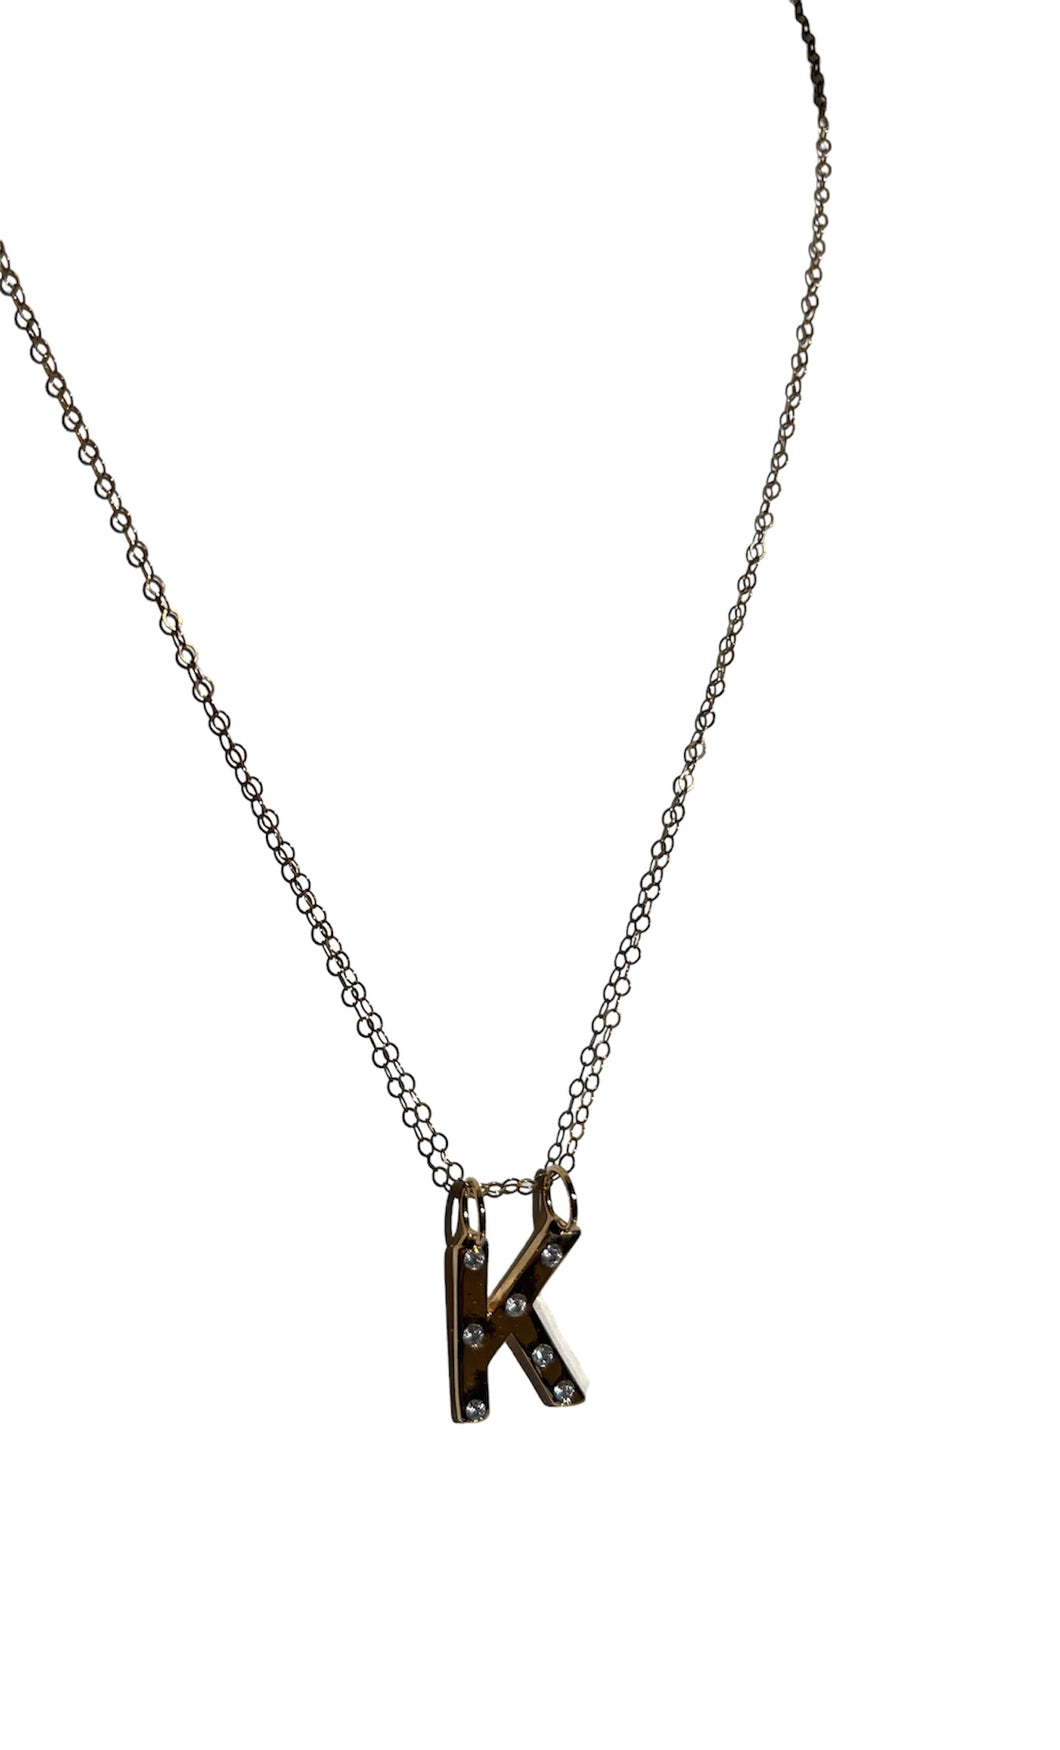 Shine The Way Initial Necklace